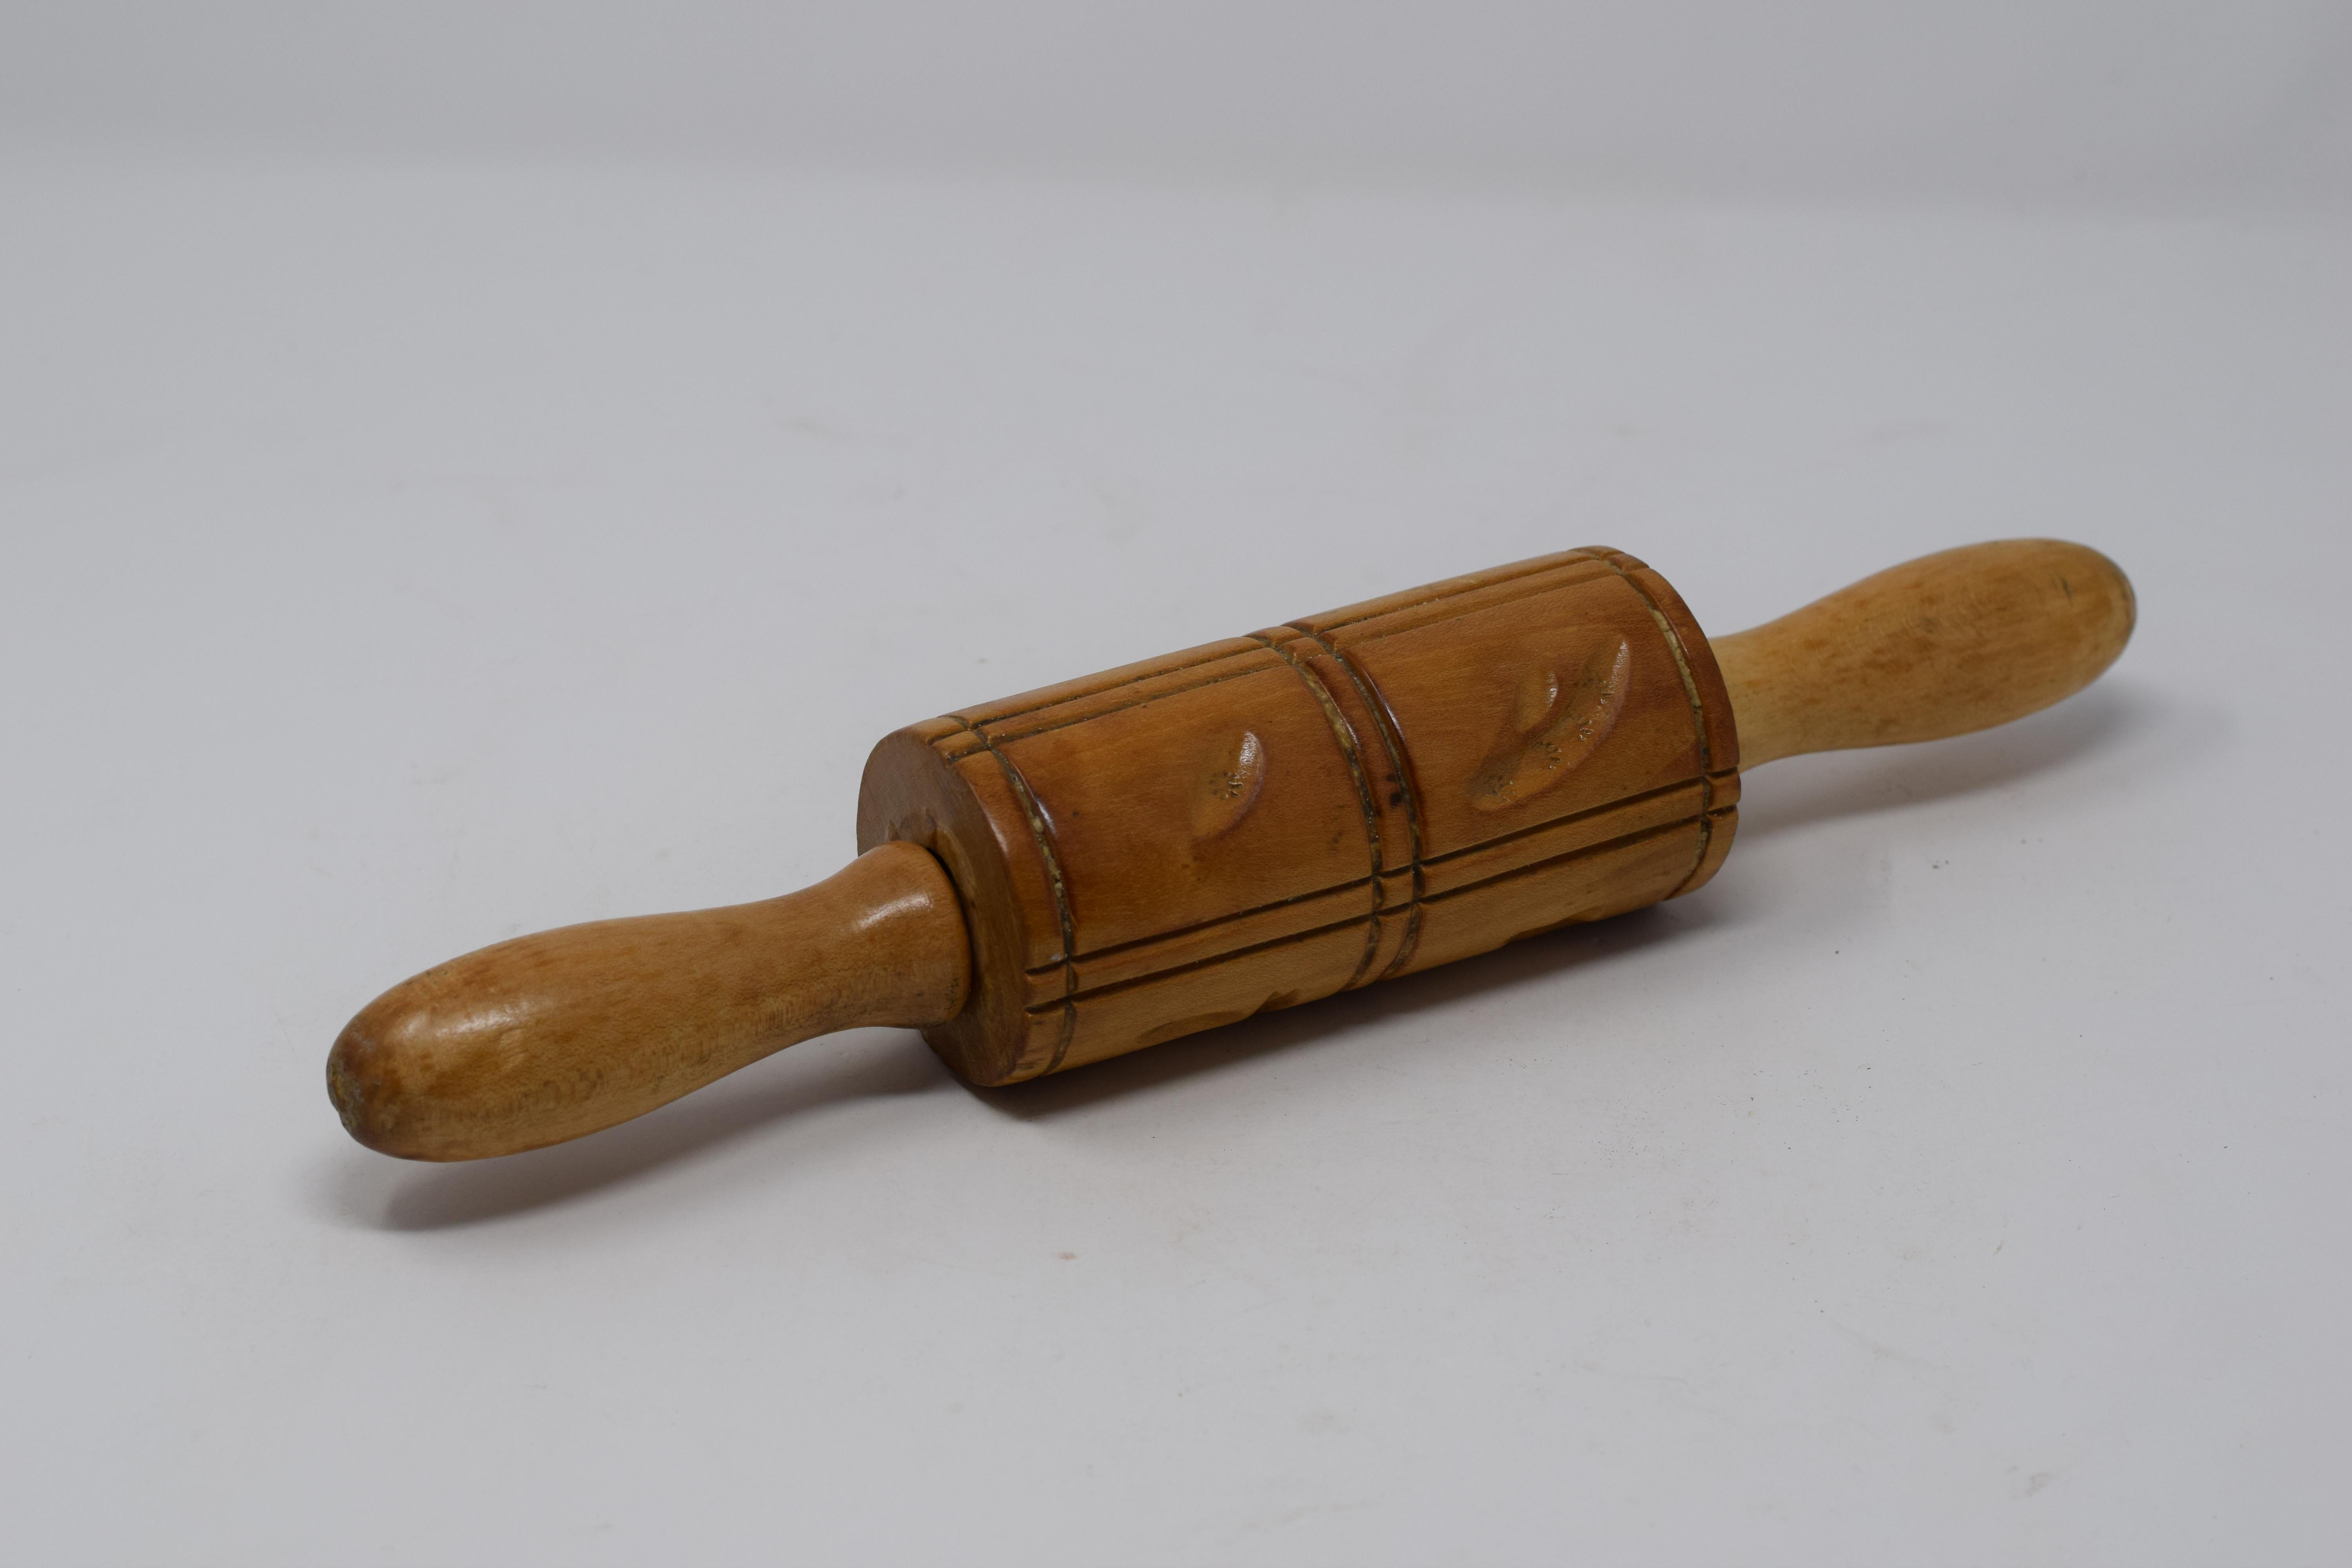 This vintage carved wood rolling pin is used to make Springerle, a type of German biscuit with an embossed design made by pressing a mold onto rolled dough and allowing the impression to dry before baking. The decorative pin features a collection of